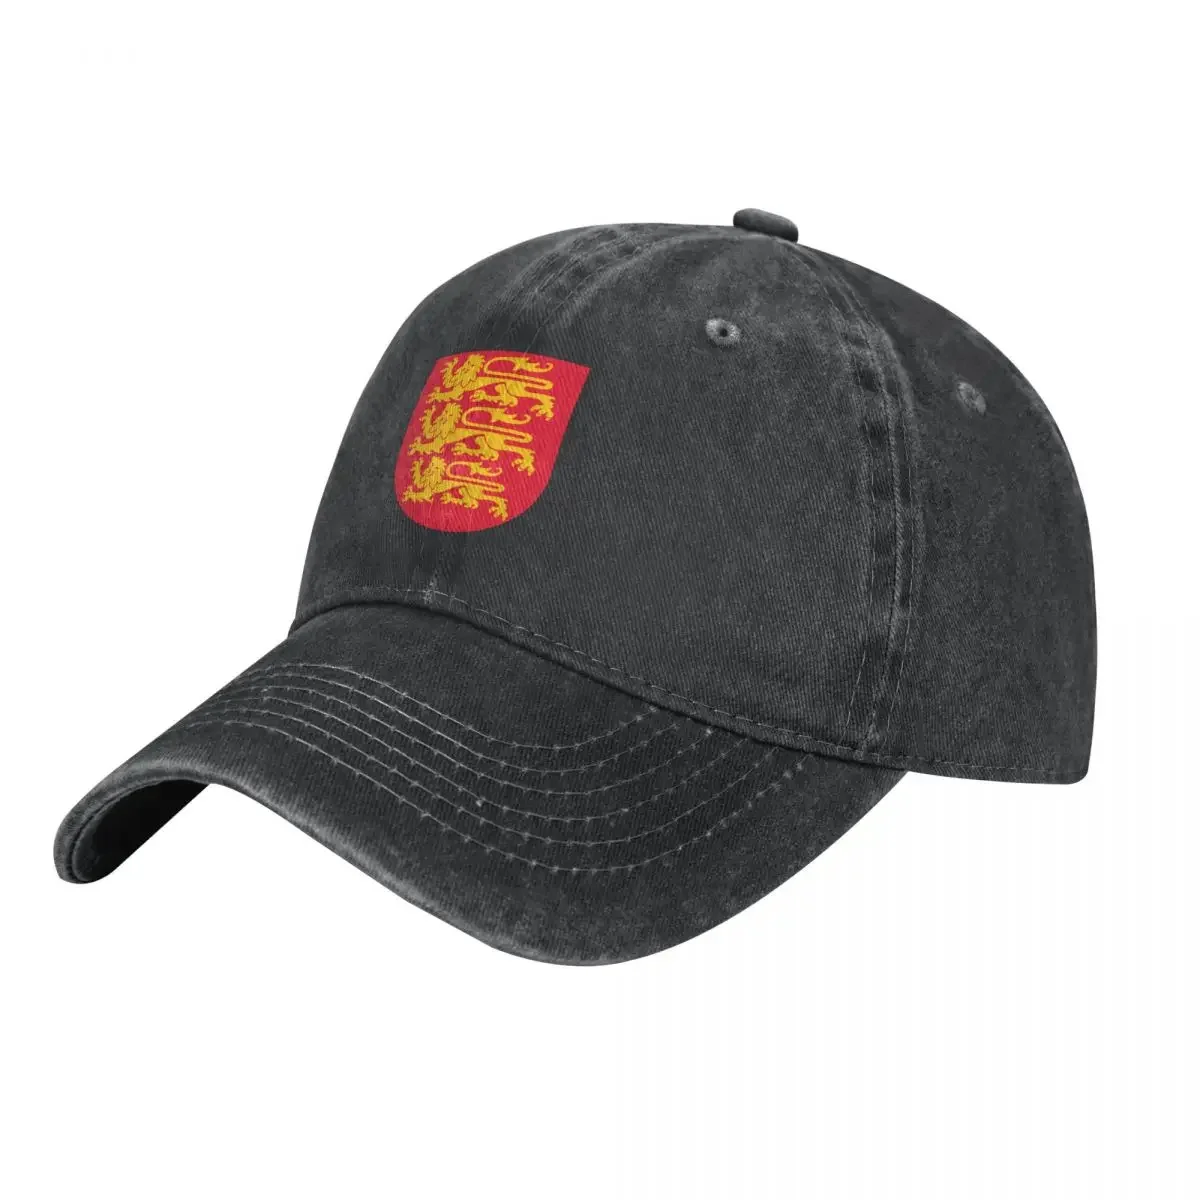 

FLAGS AND DEVICES OF THE WORLD - ROYAL ARMS OF ENGLAND Cowboy Hat Luxury Brand Sun Cap Sunscreen Mountaineering Golf Women Men's